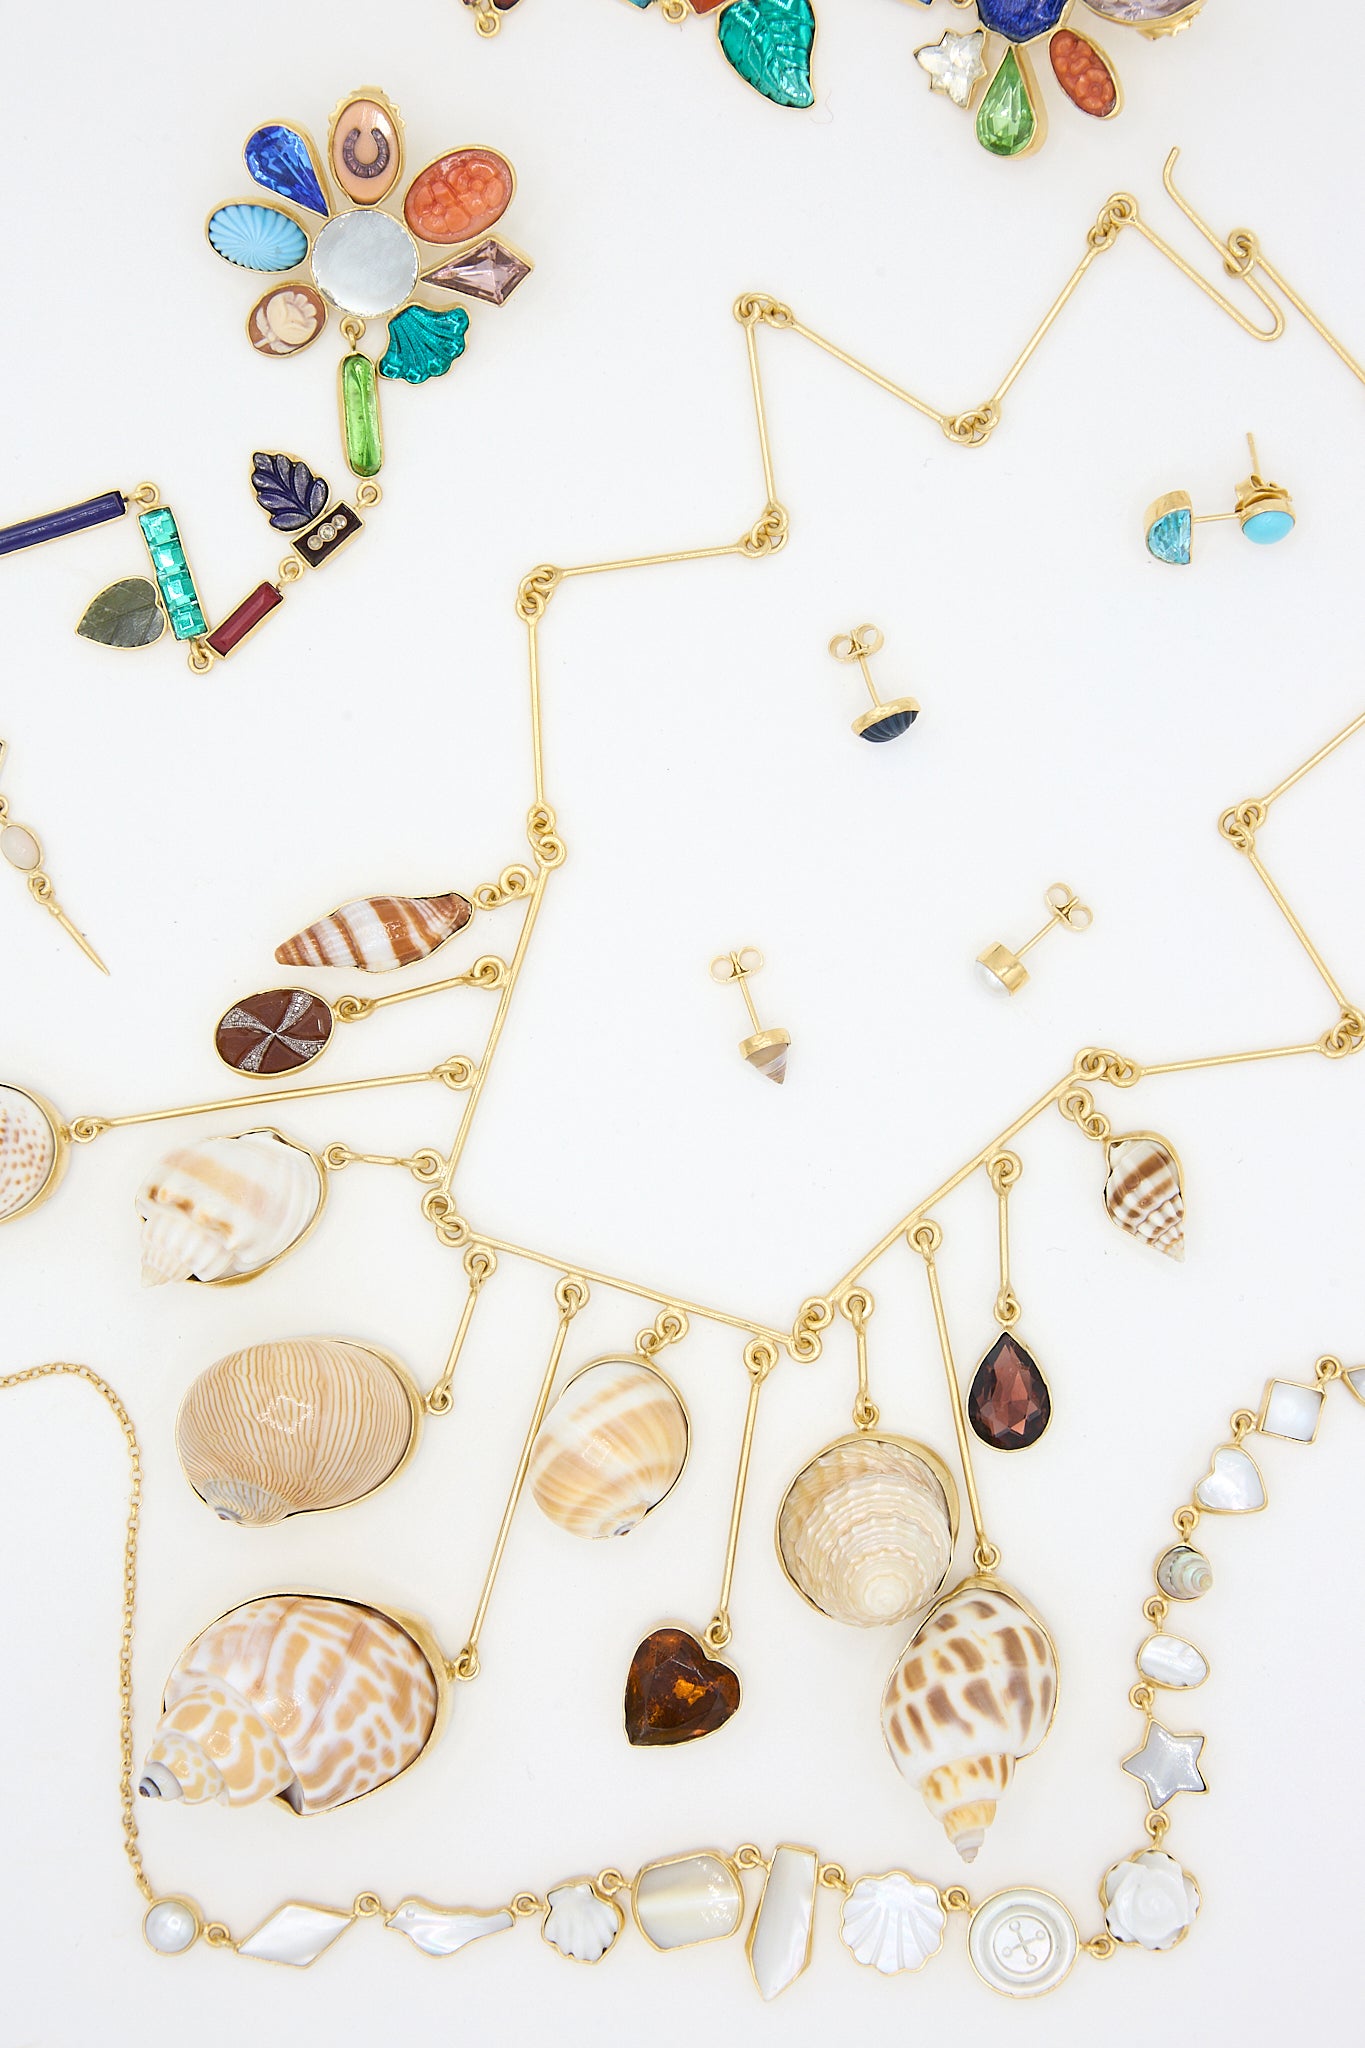 A collection of necklaces, earrings, Stud Earring in White Flower, and shells by Grainne Morton.